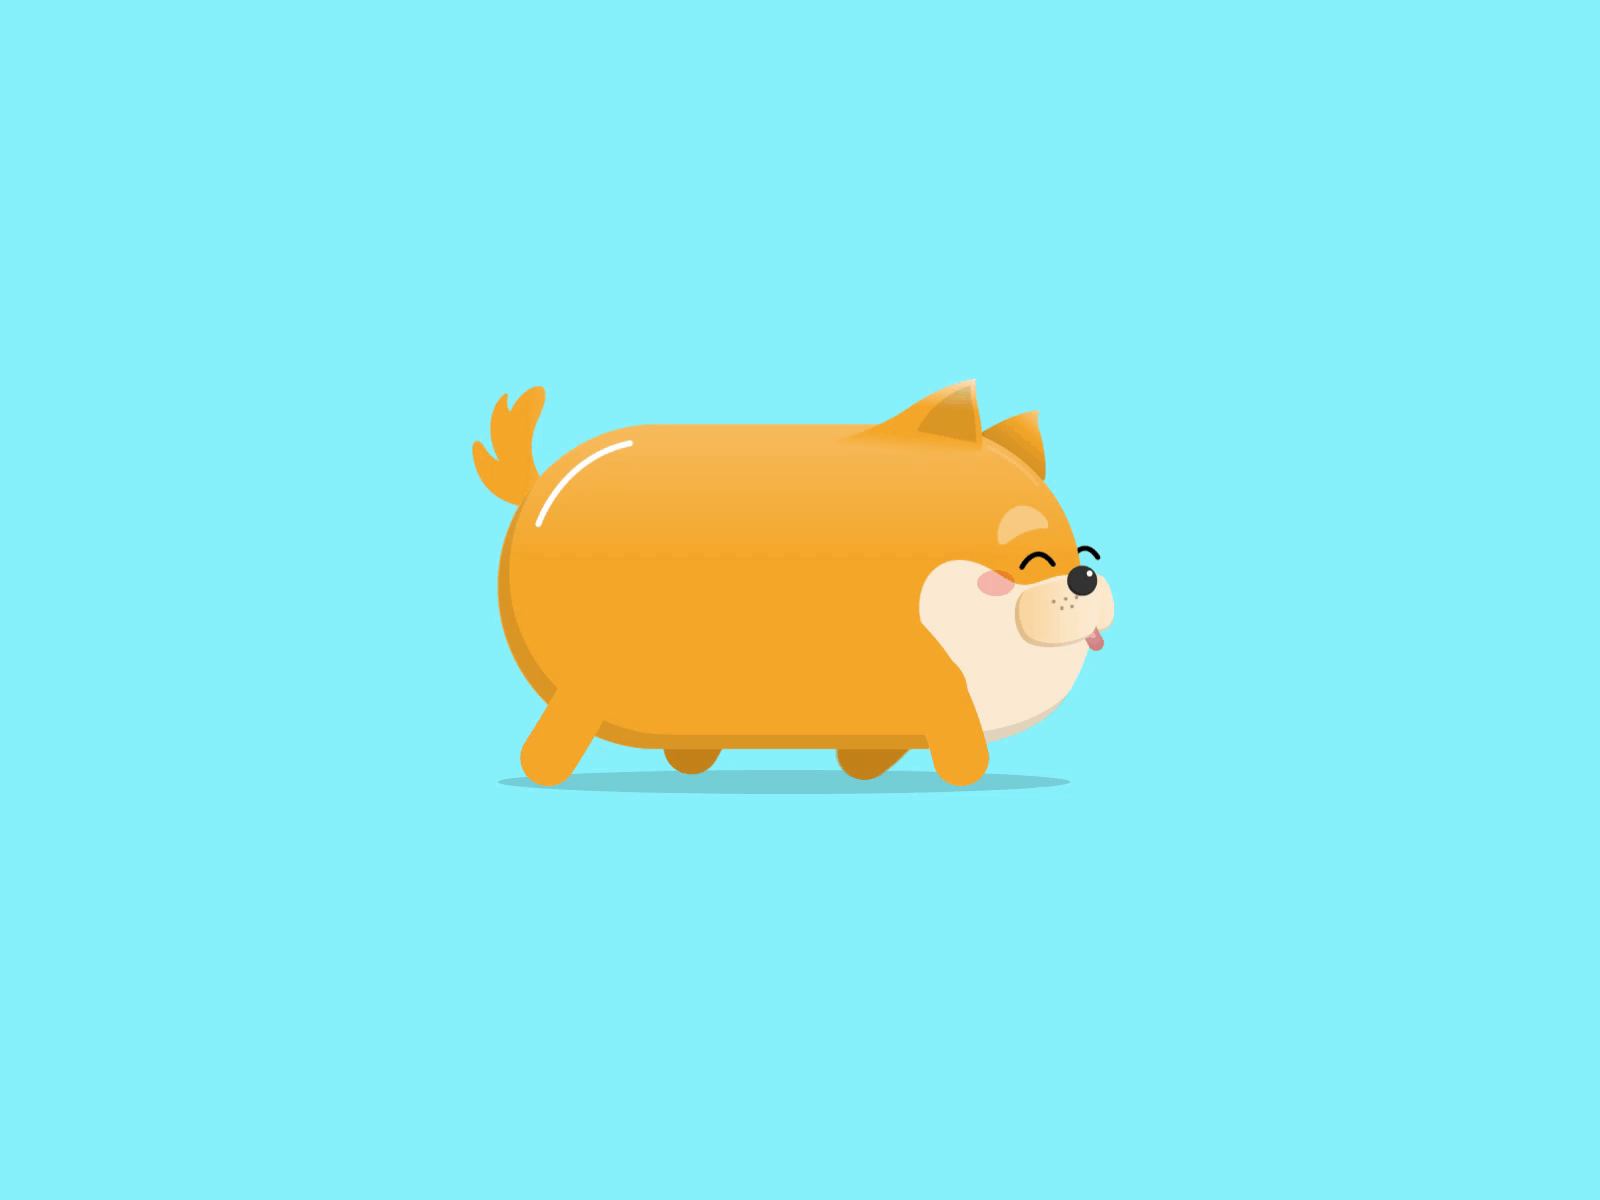 Adorable Walking Pet Animation by Arbi on Dribbble